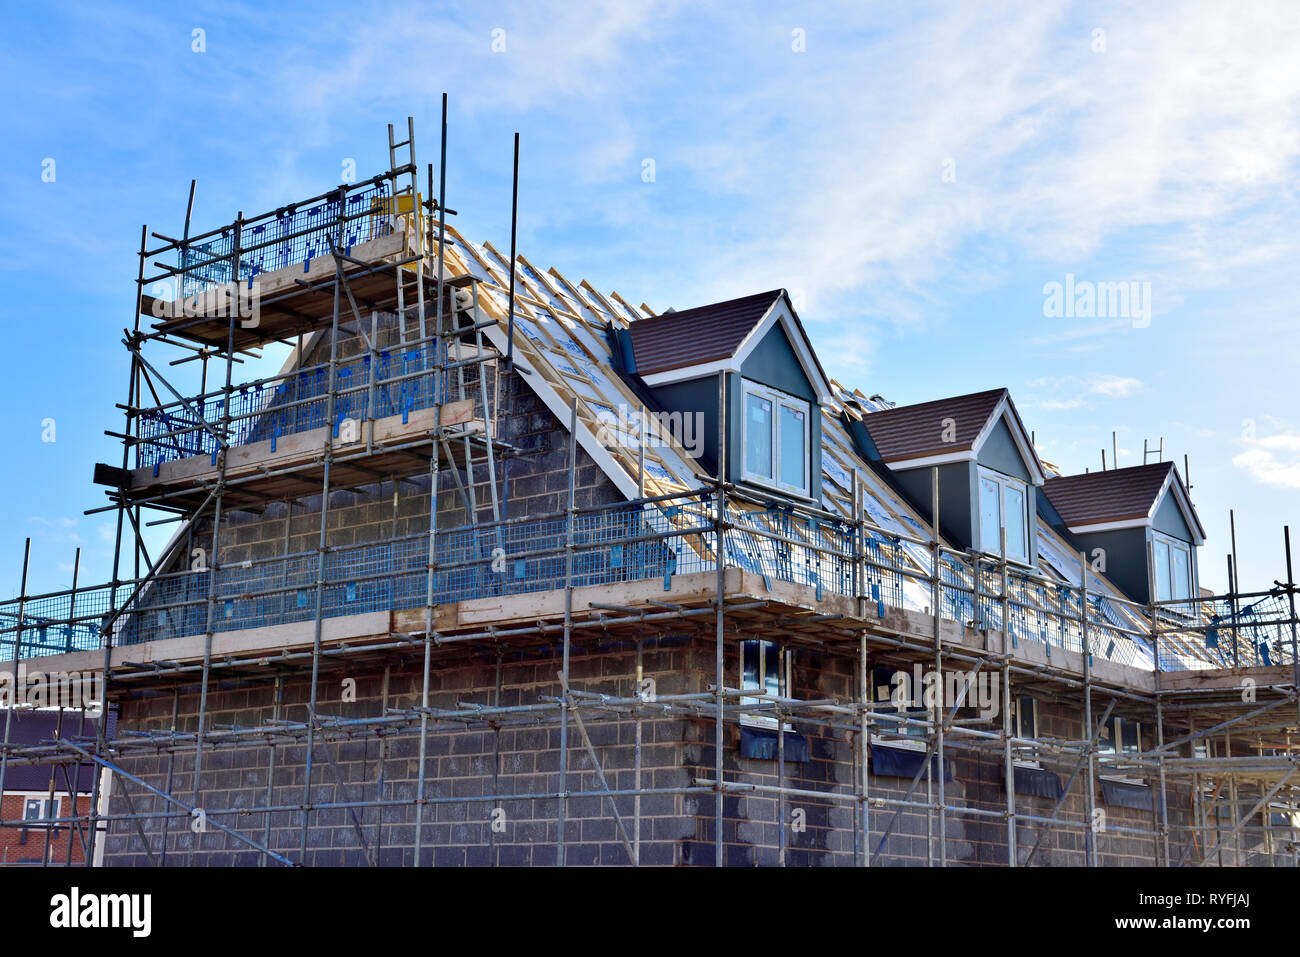 New build construction of apartments with inner skin of concrete blocks and dormer windows, England Stock Photo